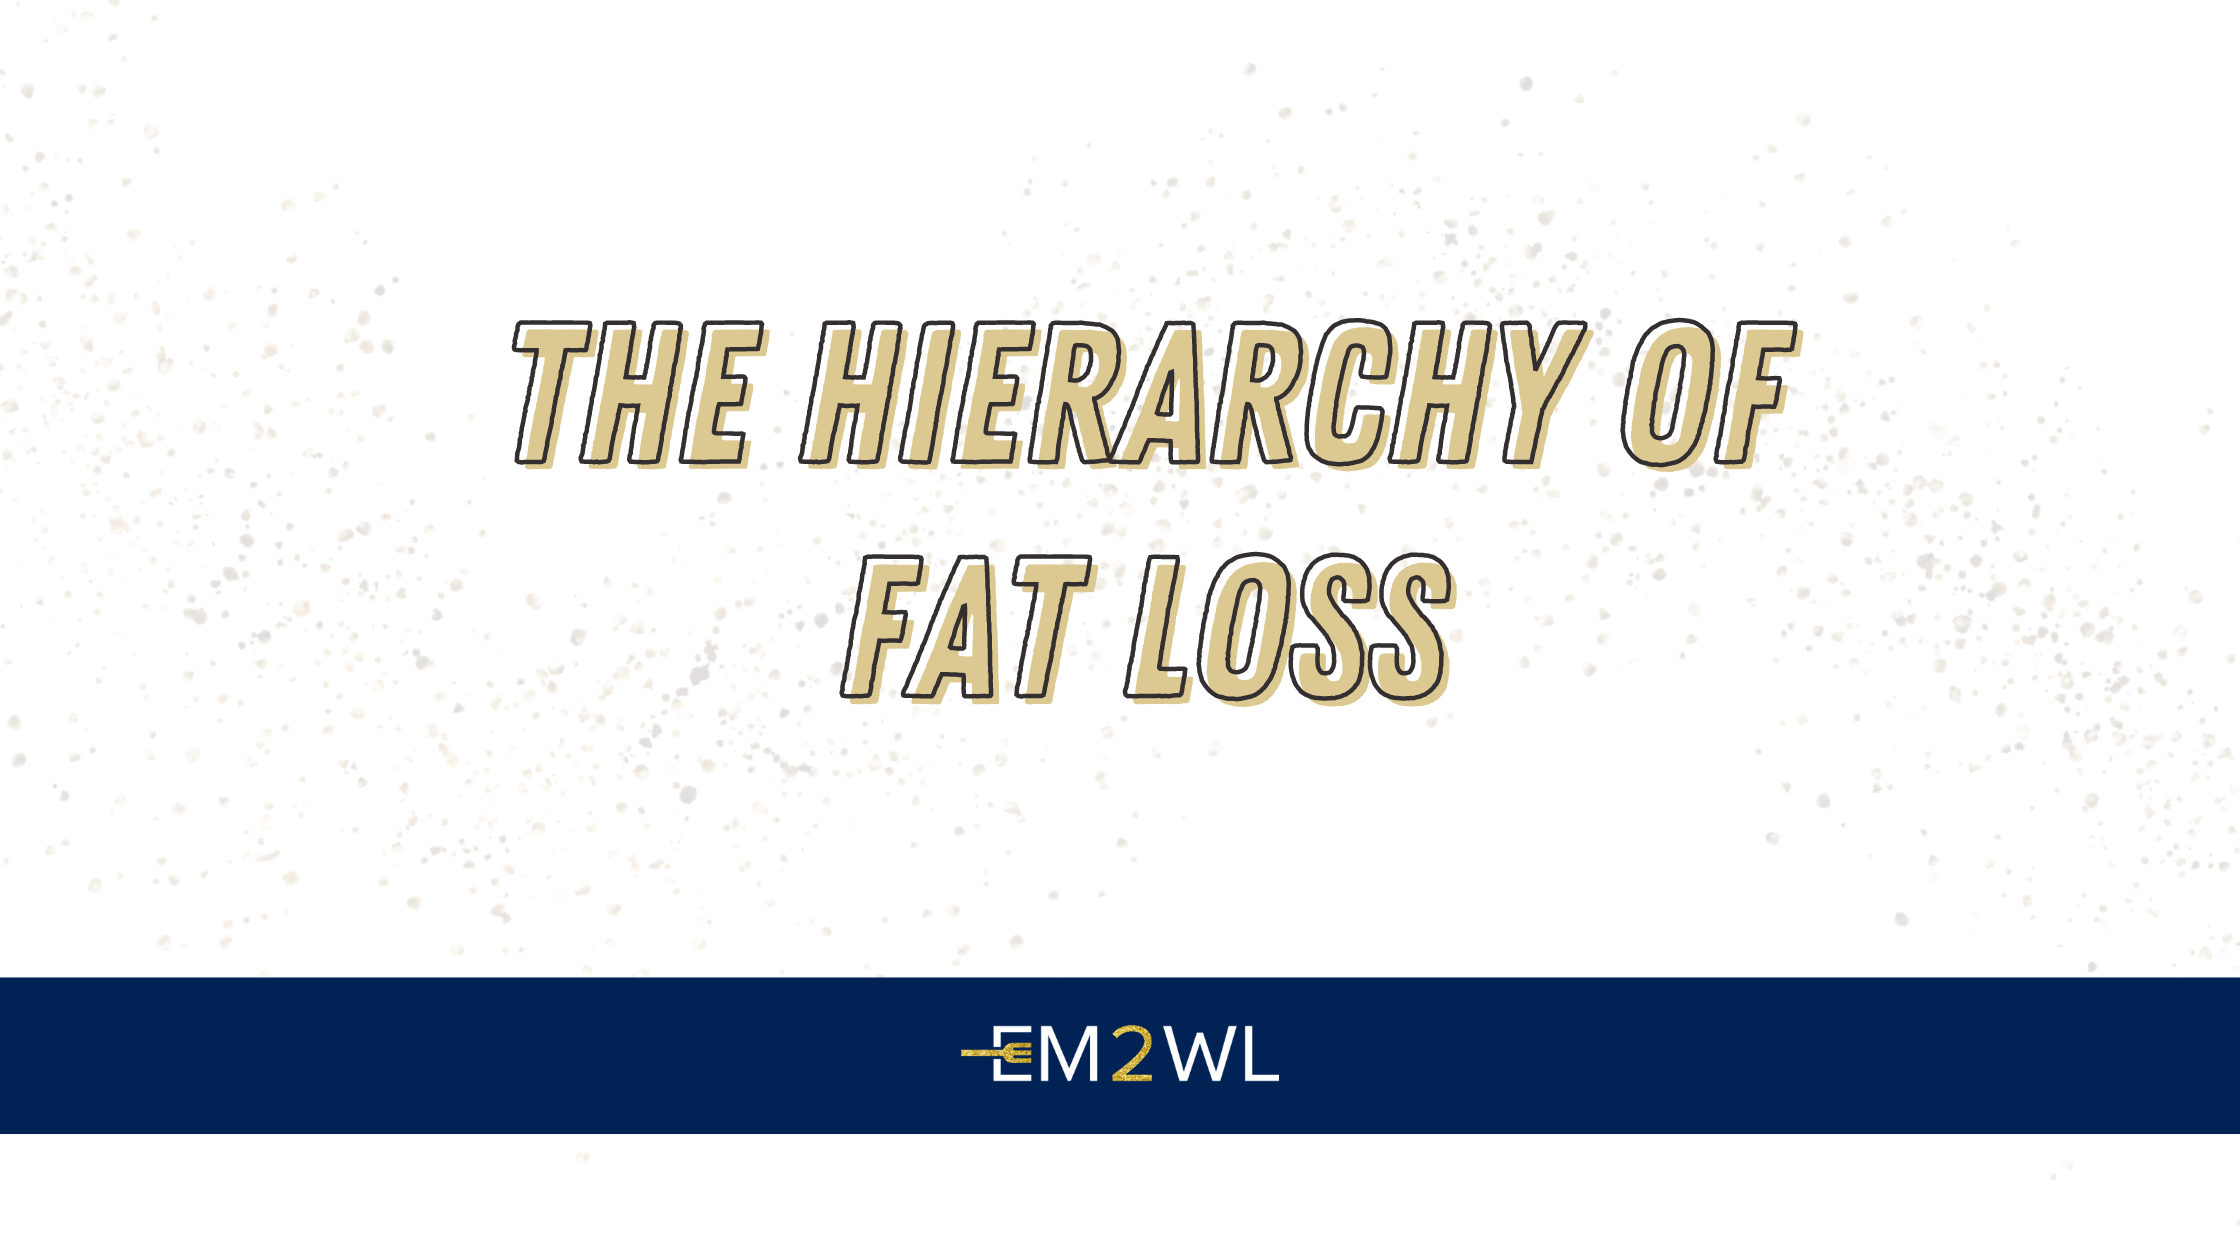 The Hierarchy of Fat Loss